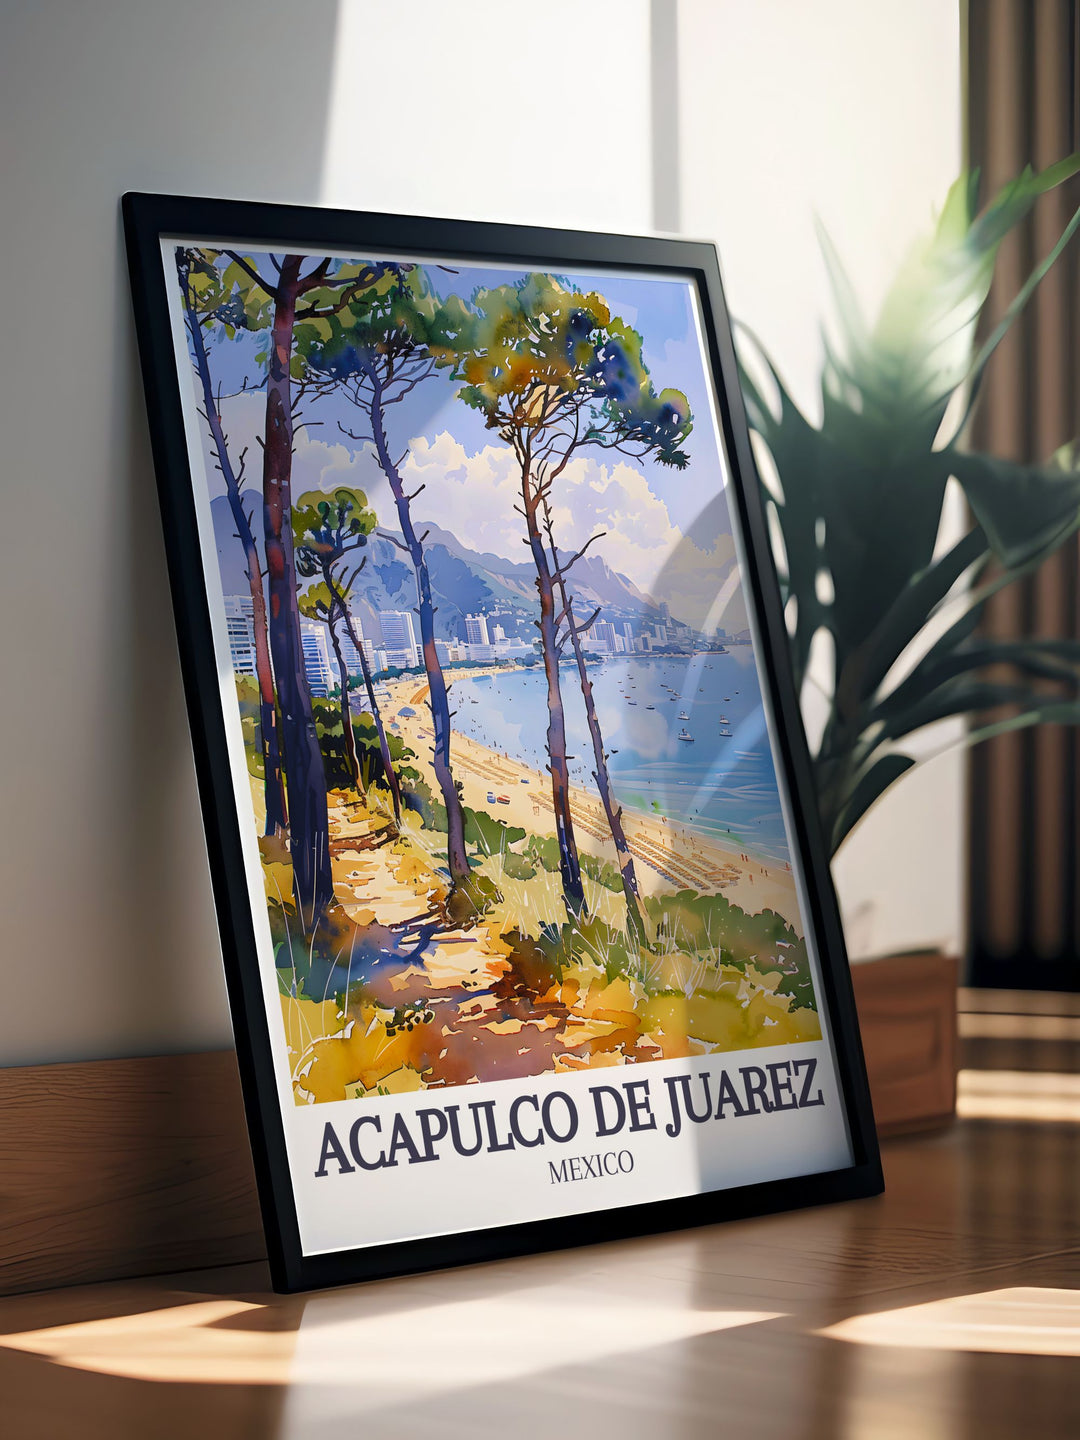 This travel poster captures the historical significance and scenic charm of Acapulco de Juárez, showcasing its iconic Playa Condesa and majestic Acapulco Bay.